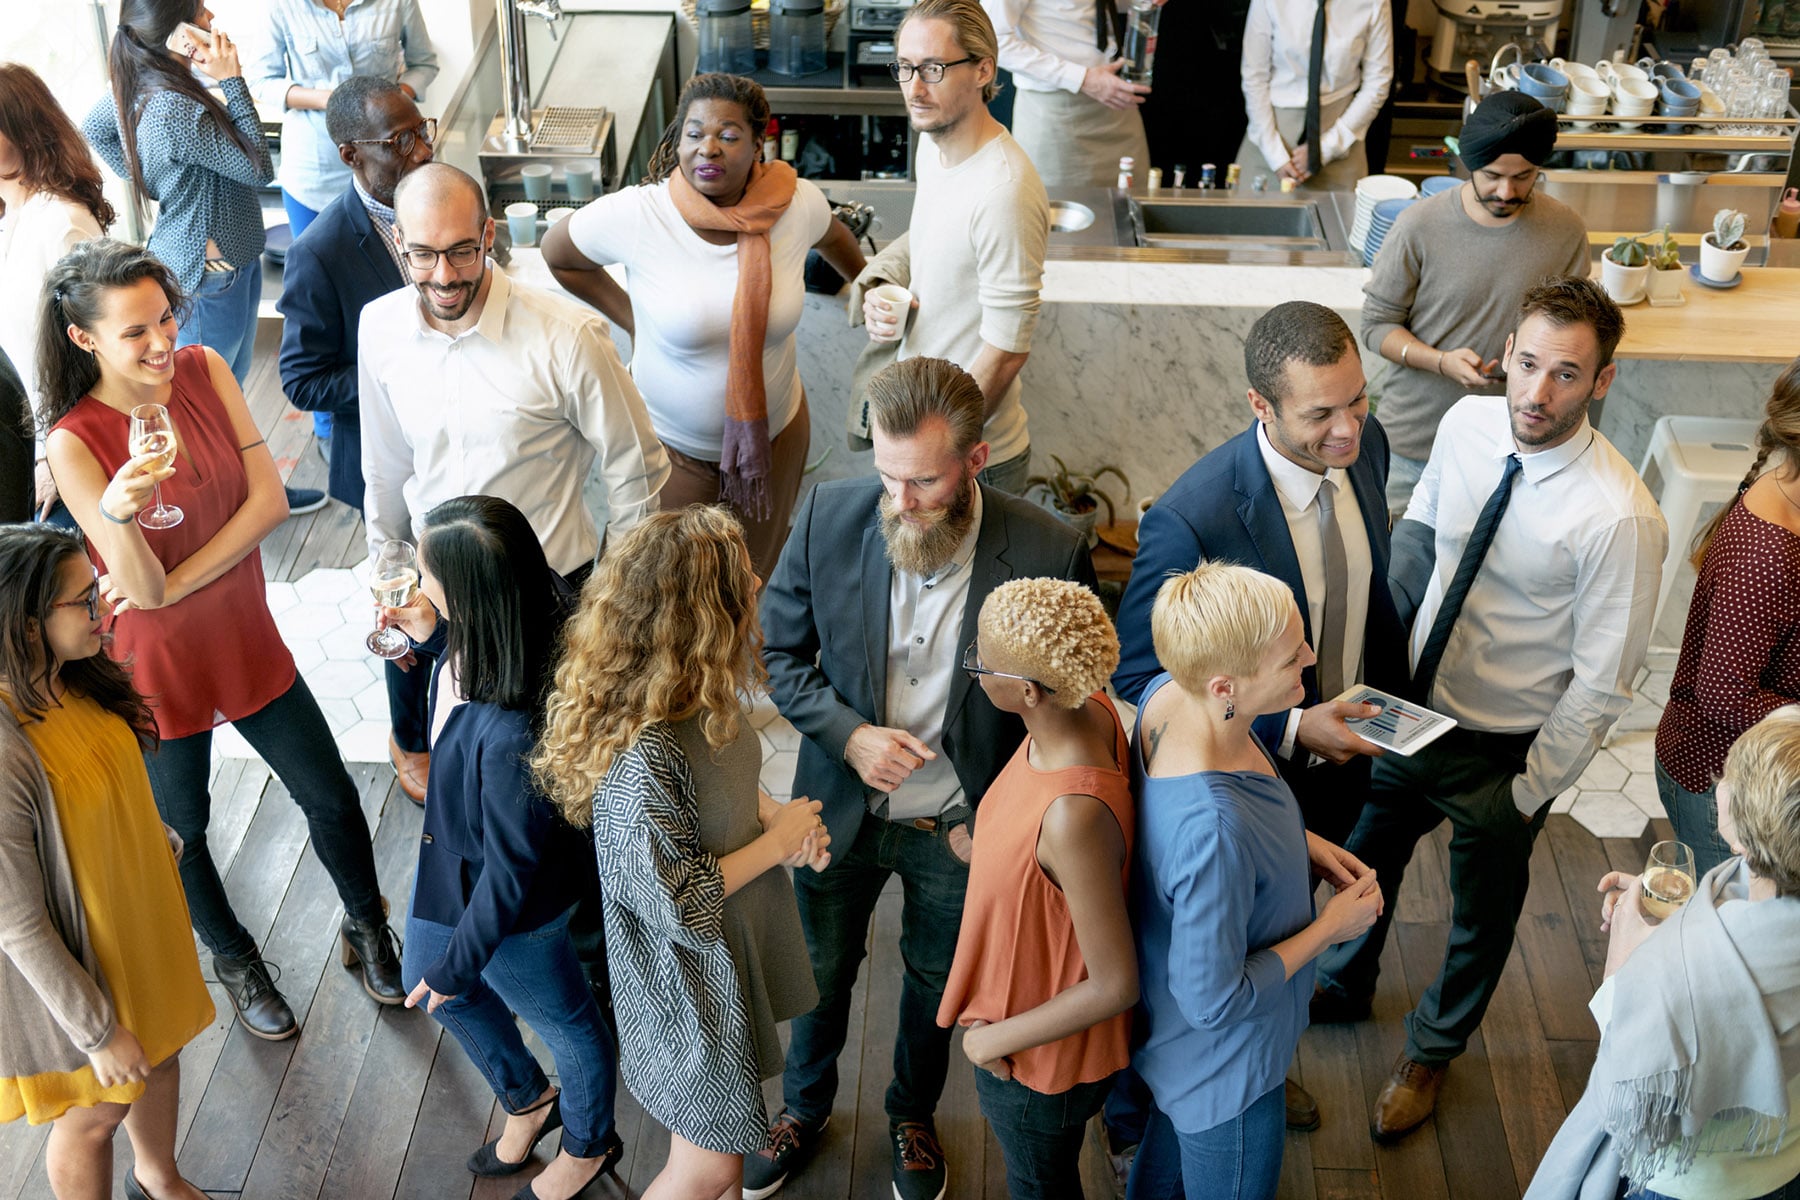  A group of diverse professionals networking and socializing in a casual setting.